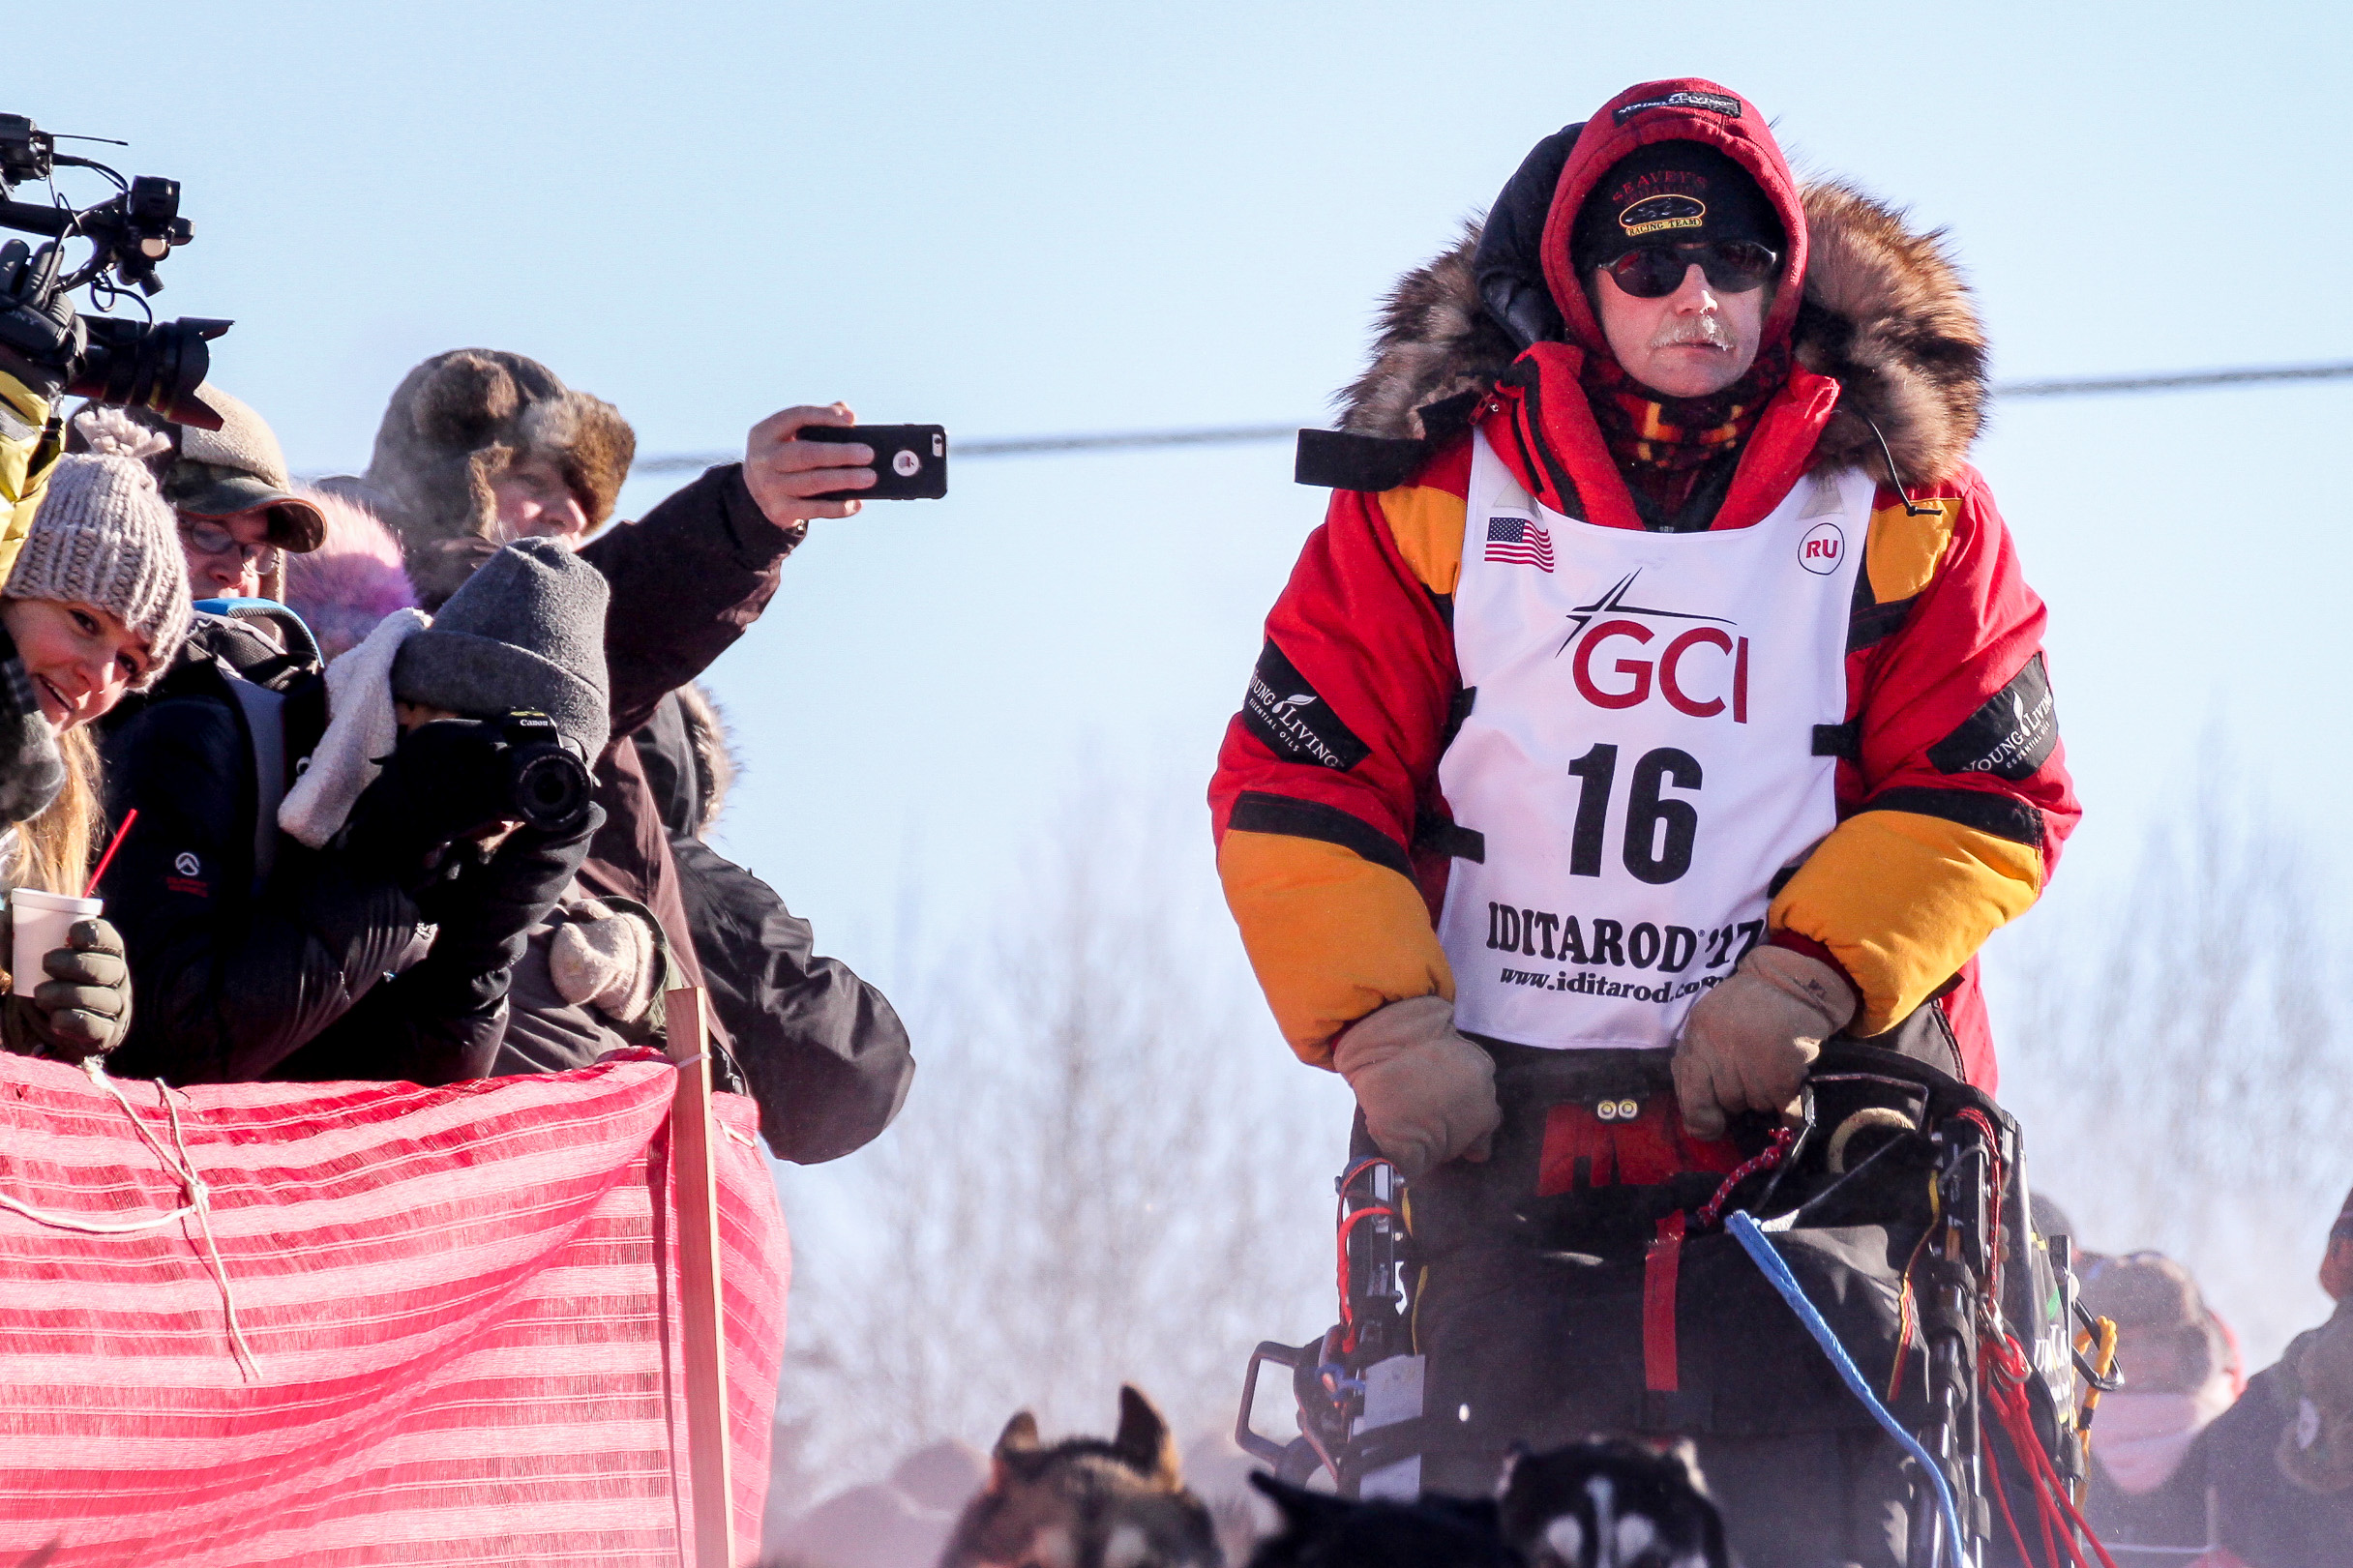 Two-time champion Mitch Seavey begins his Iditarod run at the Fairbanks re-start on Monday. (Photo by Ben Matheson/KNOM)